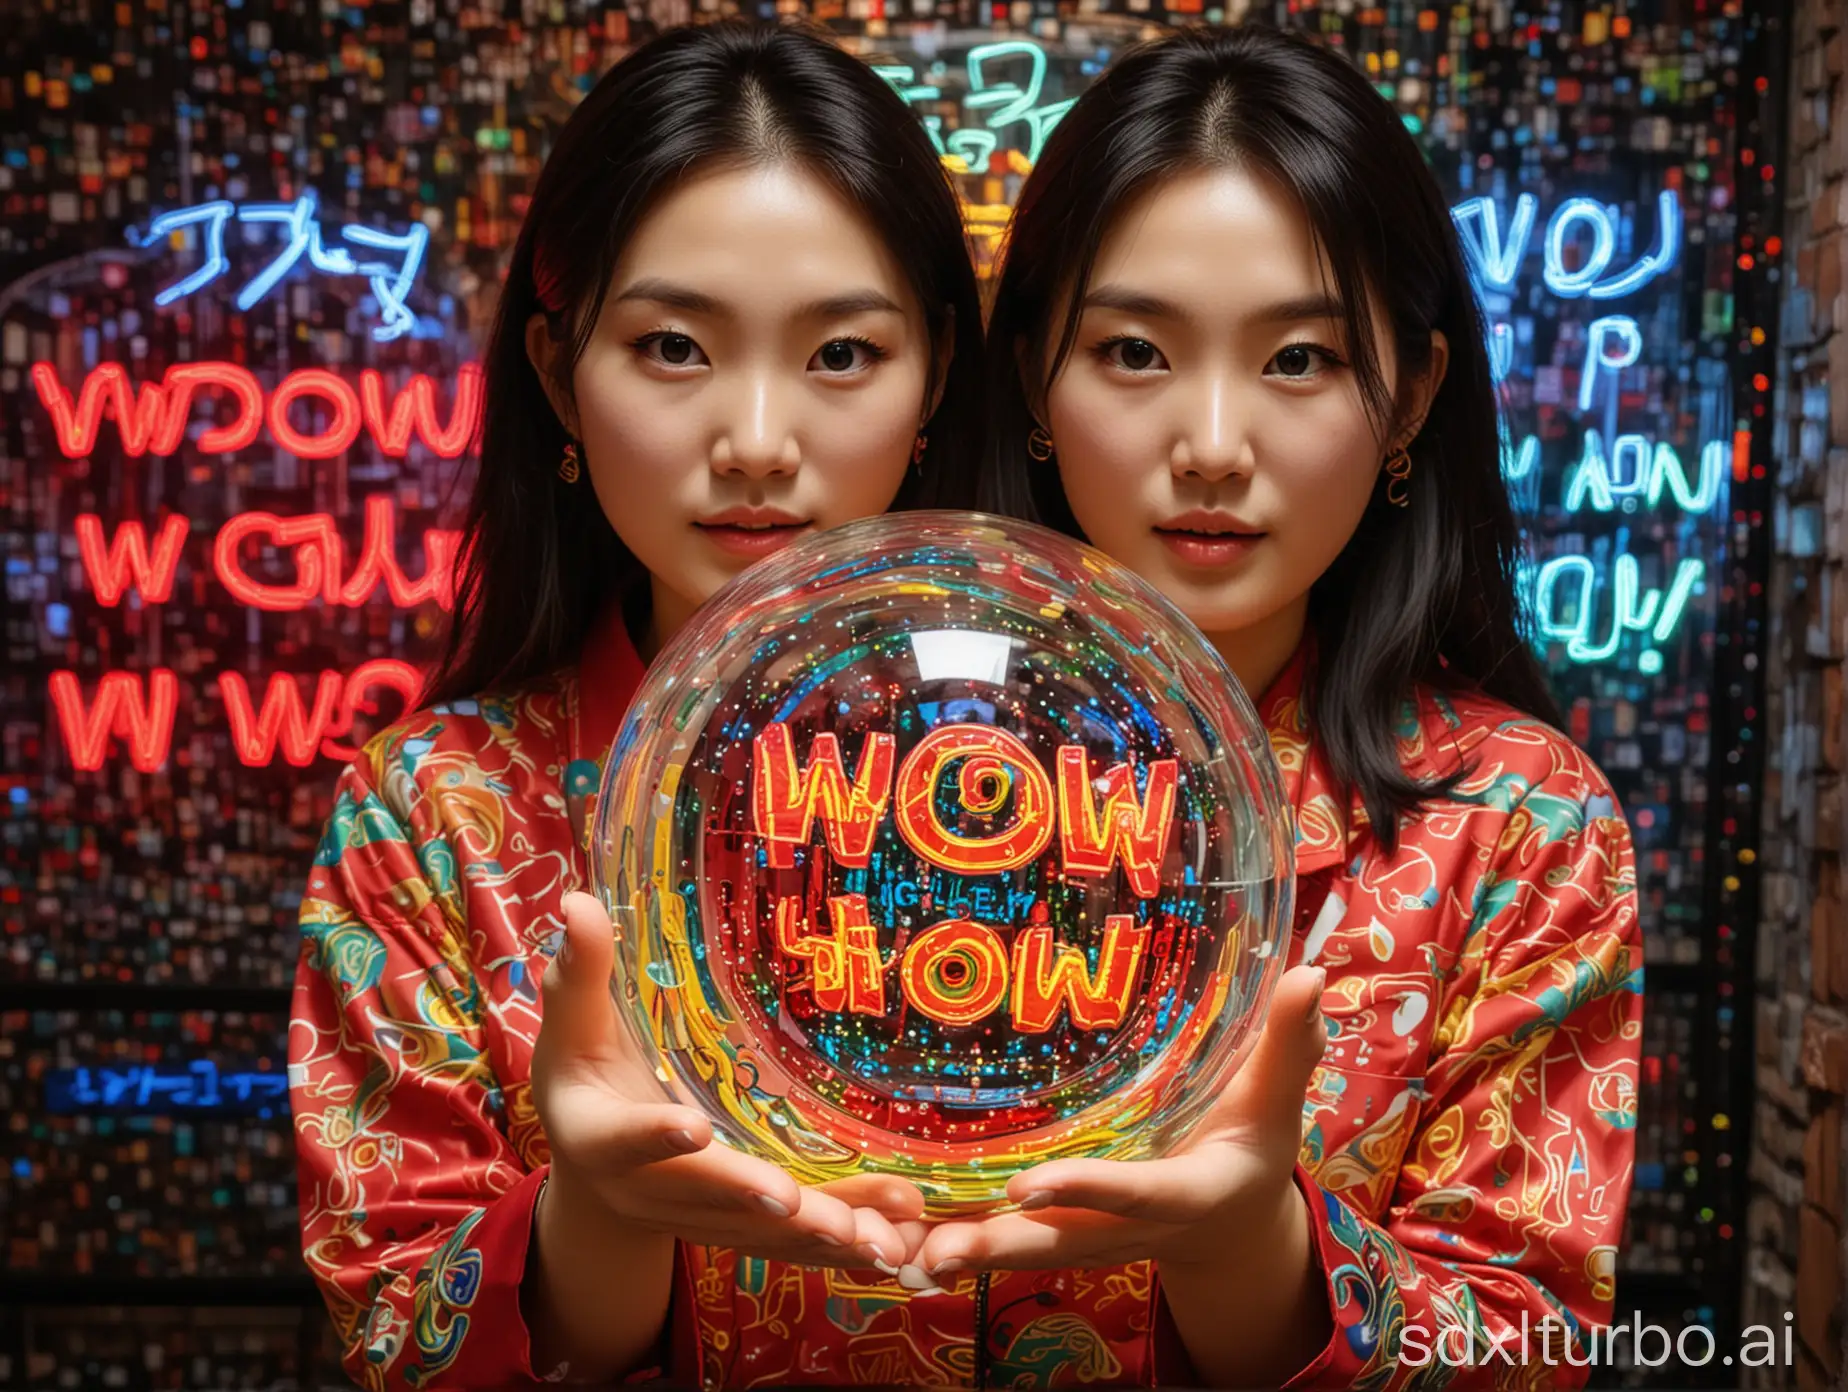 Korean-Woman-Holding-Neon-Wow-Wow-Crystal-Ball-on-Colorful-Swirl-Background